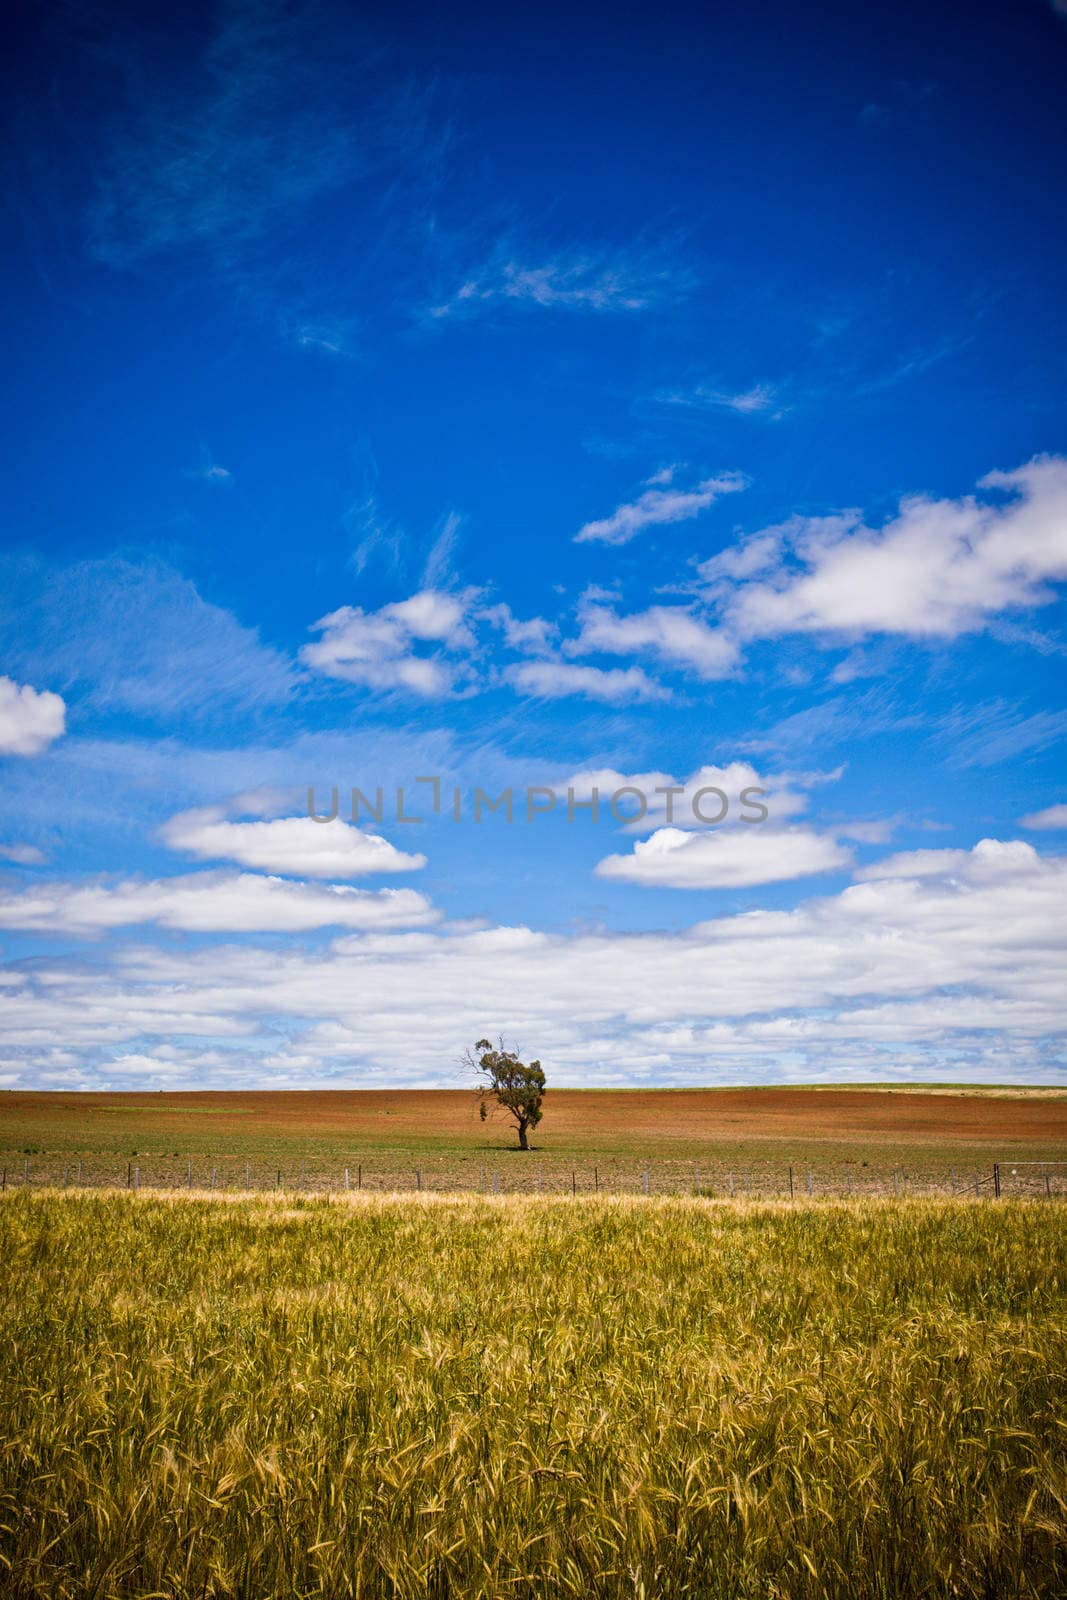 Iimmense blue sky and fields by jrstock